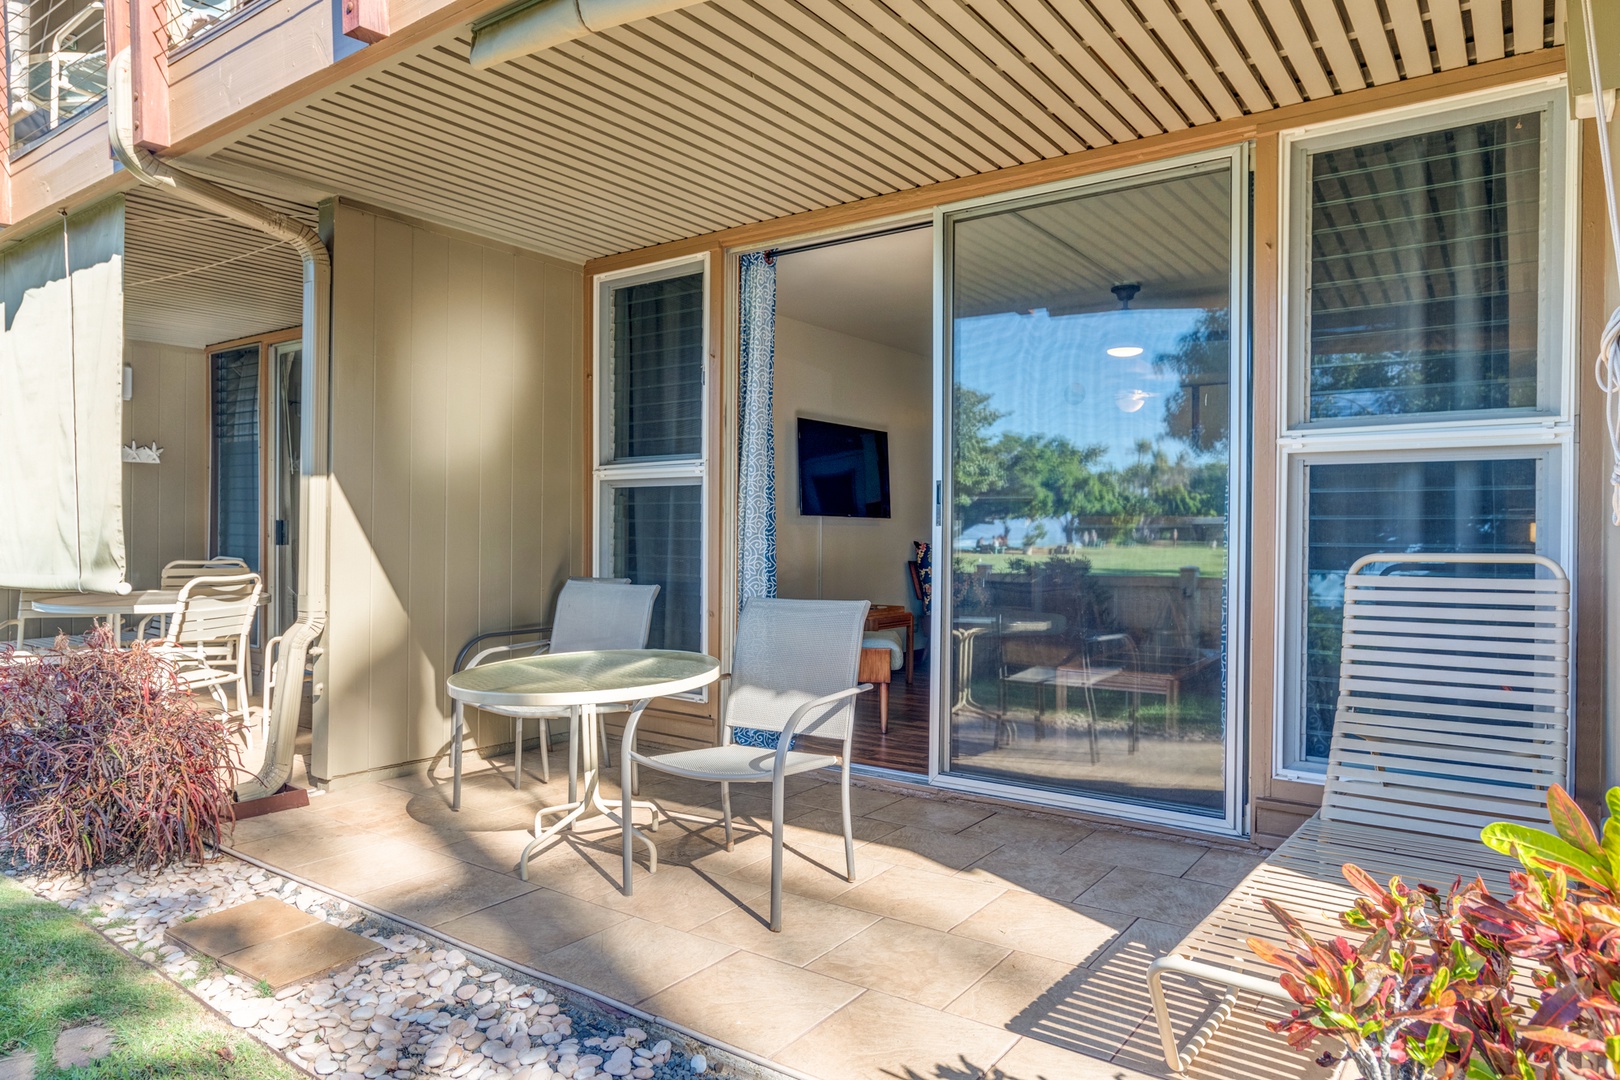 Lahaina Vacation Rentals, Hale Kai 109 - Covered lanai with chaise lounger